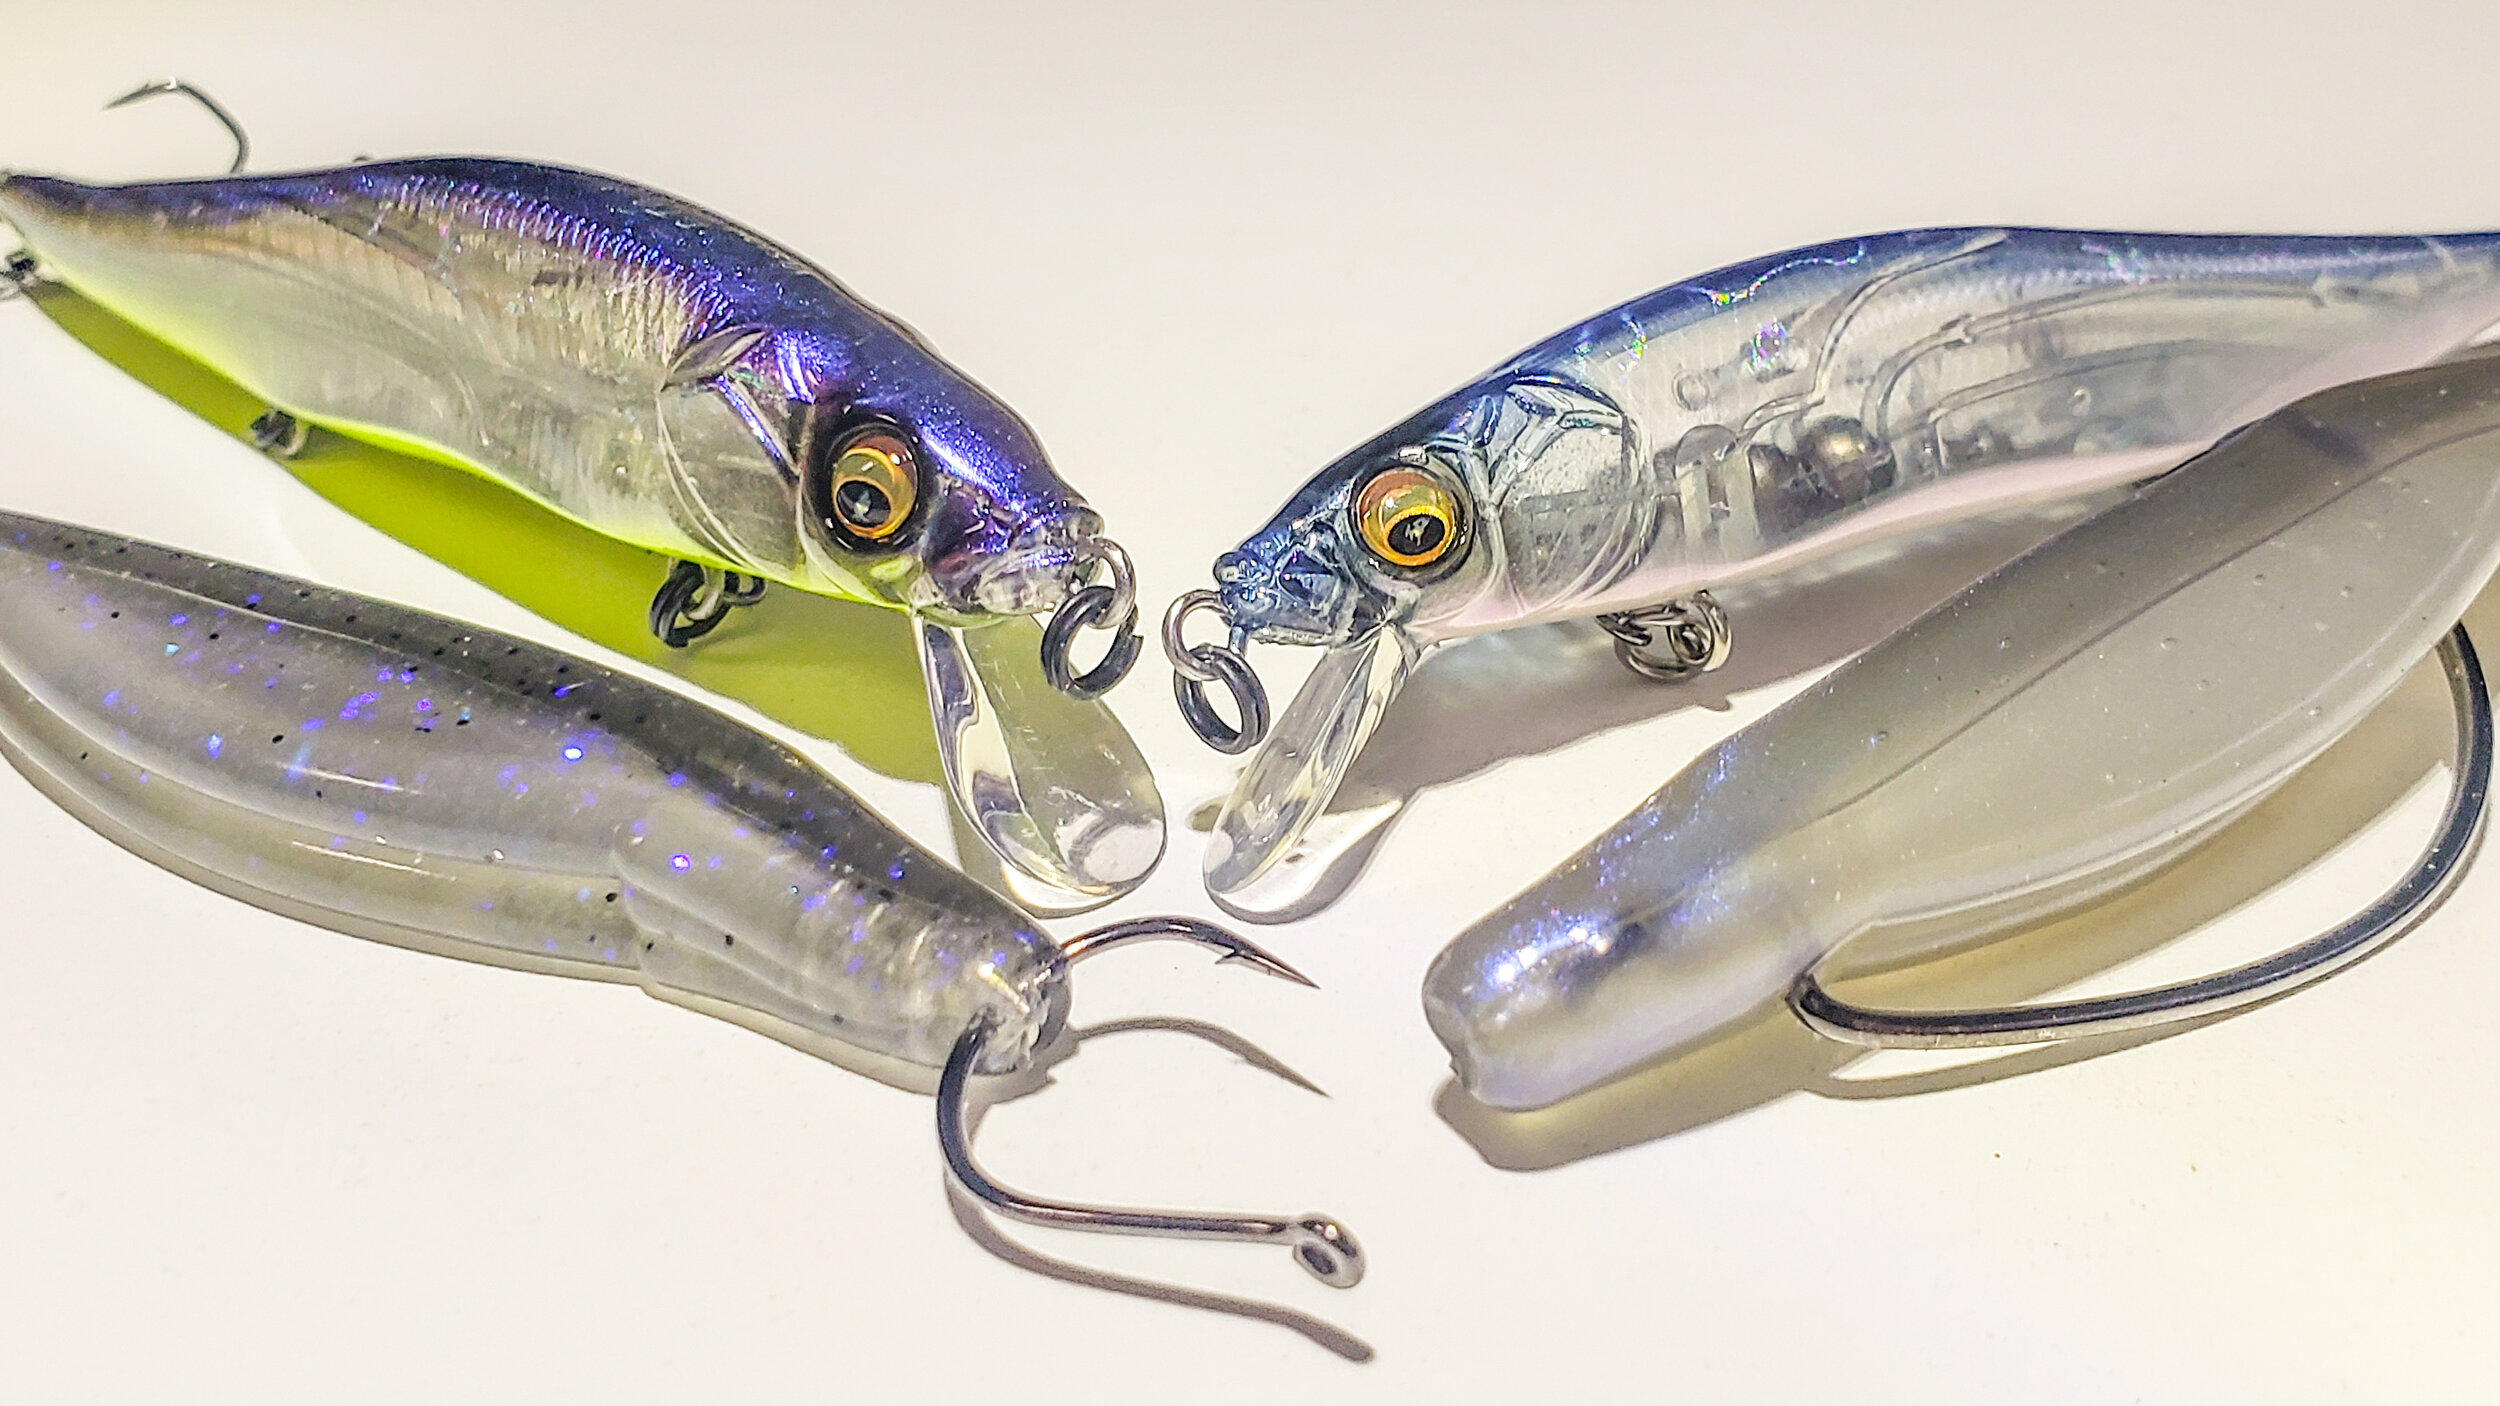 Spring Fluke and Jerkbait Tricks To Catch More Bass! — Tactical